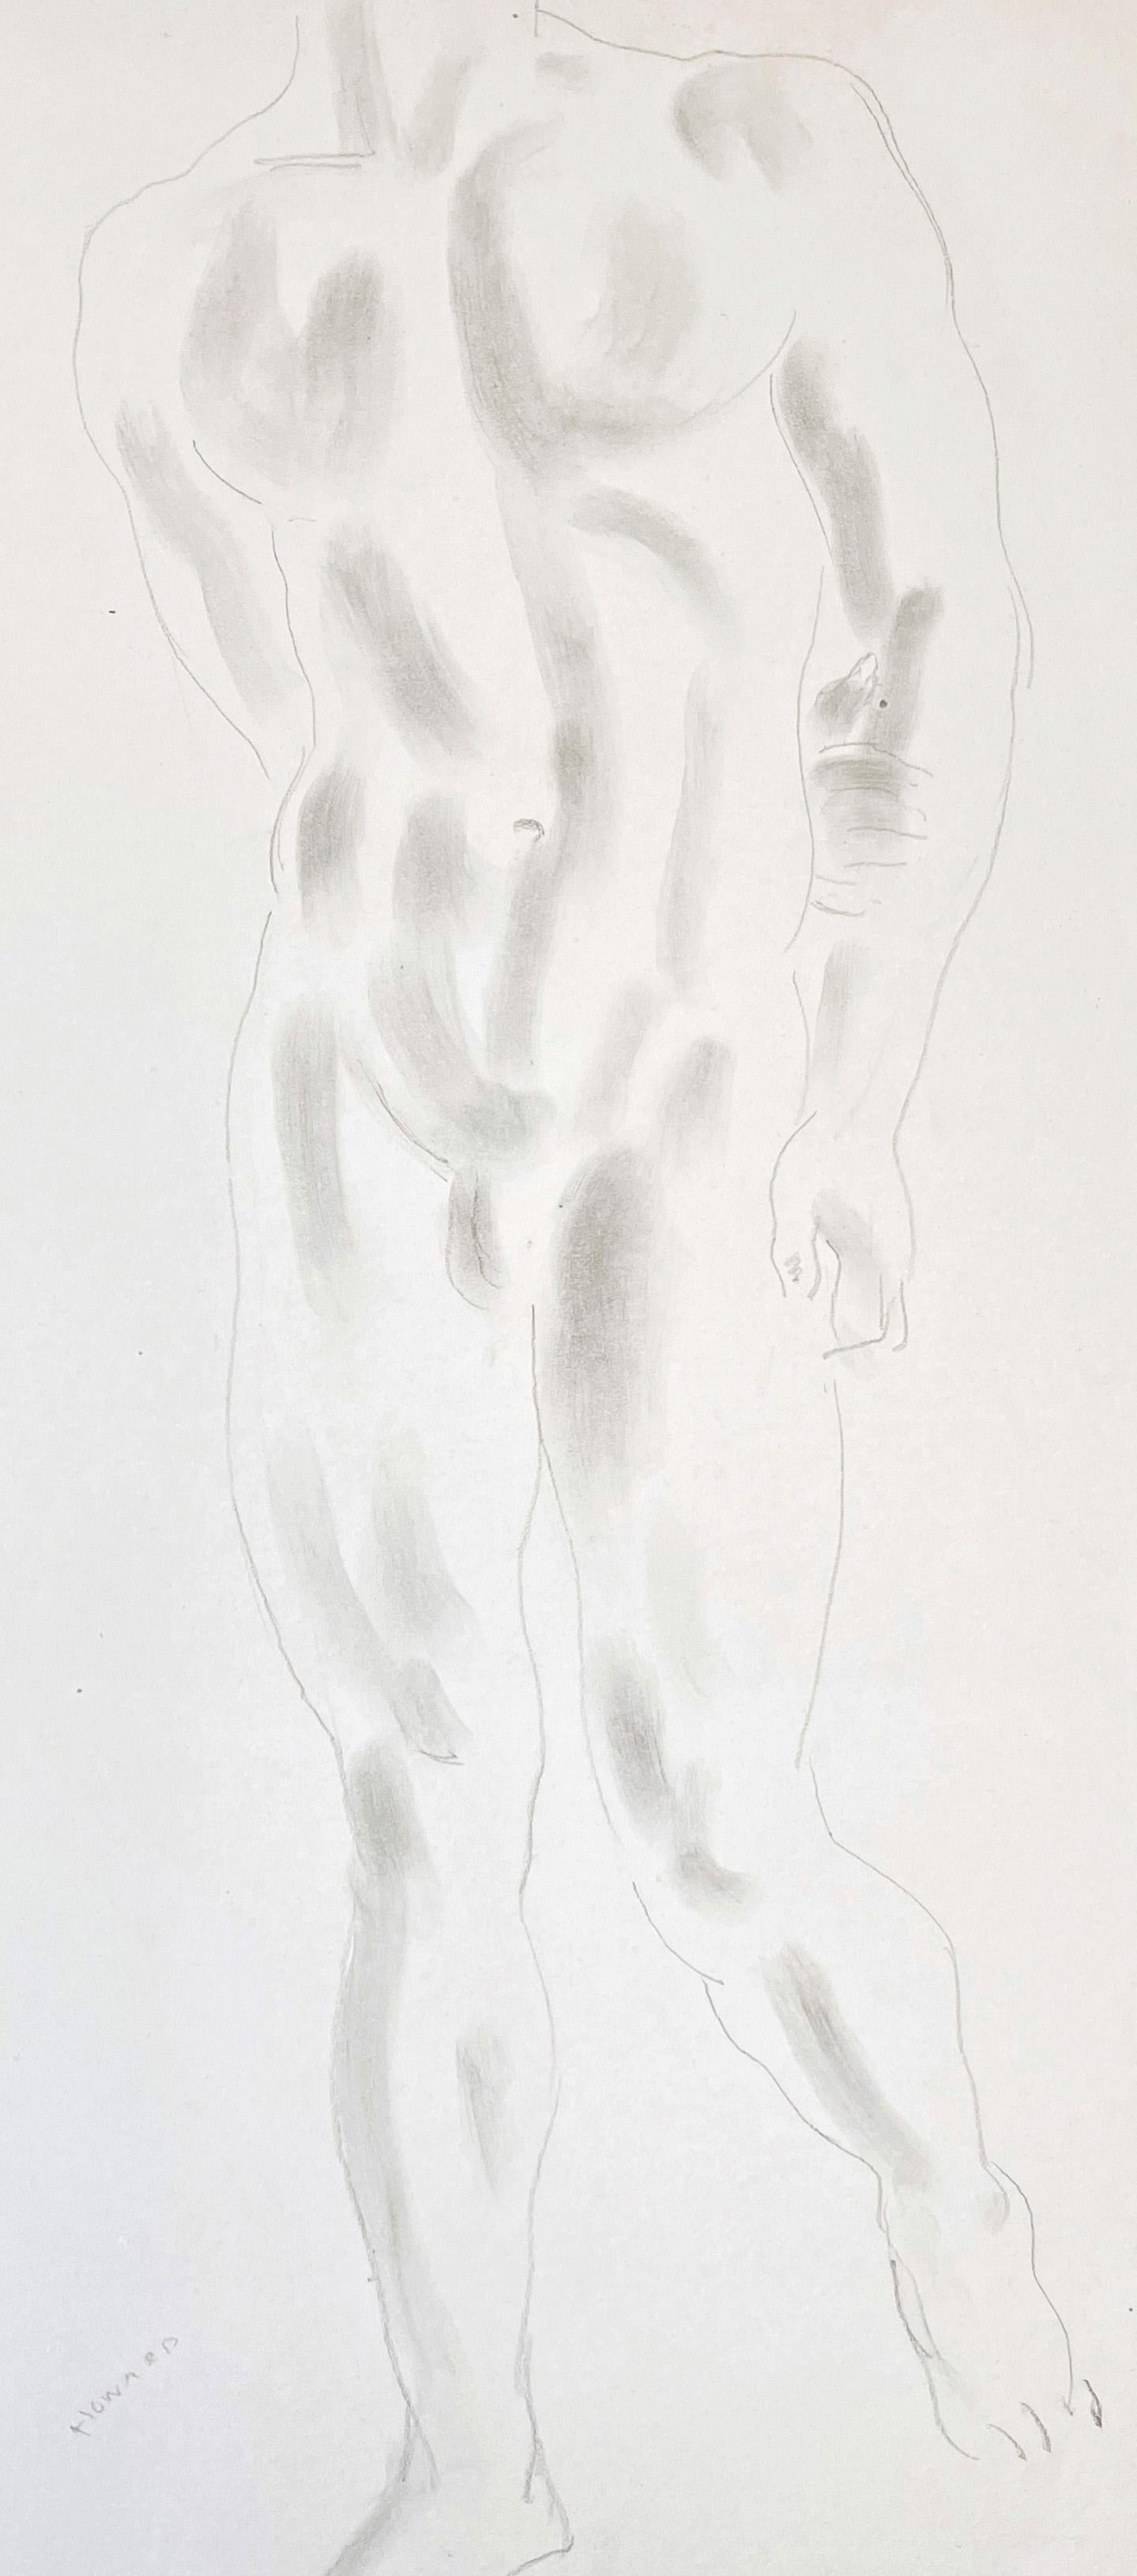 Exquisitely drawn in pencil and a feather, light ink wash, creating a pale, ghostly image that is refined and haunting, this full length male nude was accomplished by Cecil de Blaquiere Howard, the extraordinarily accomplished